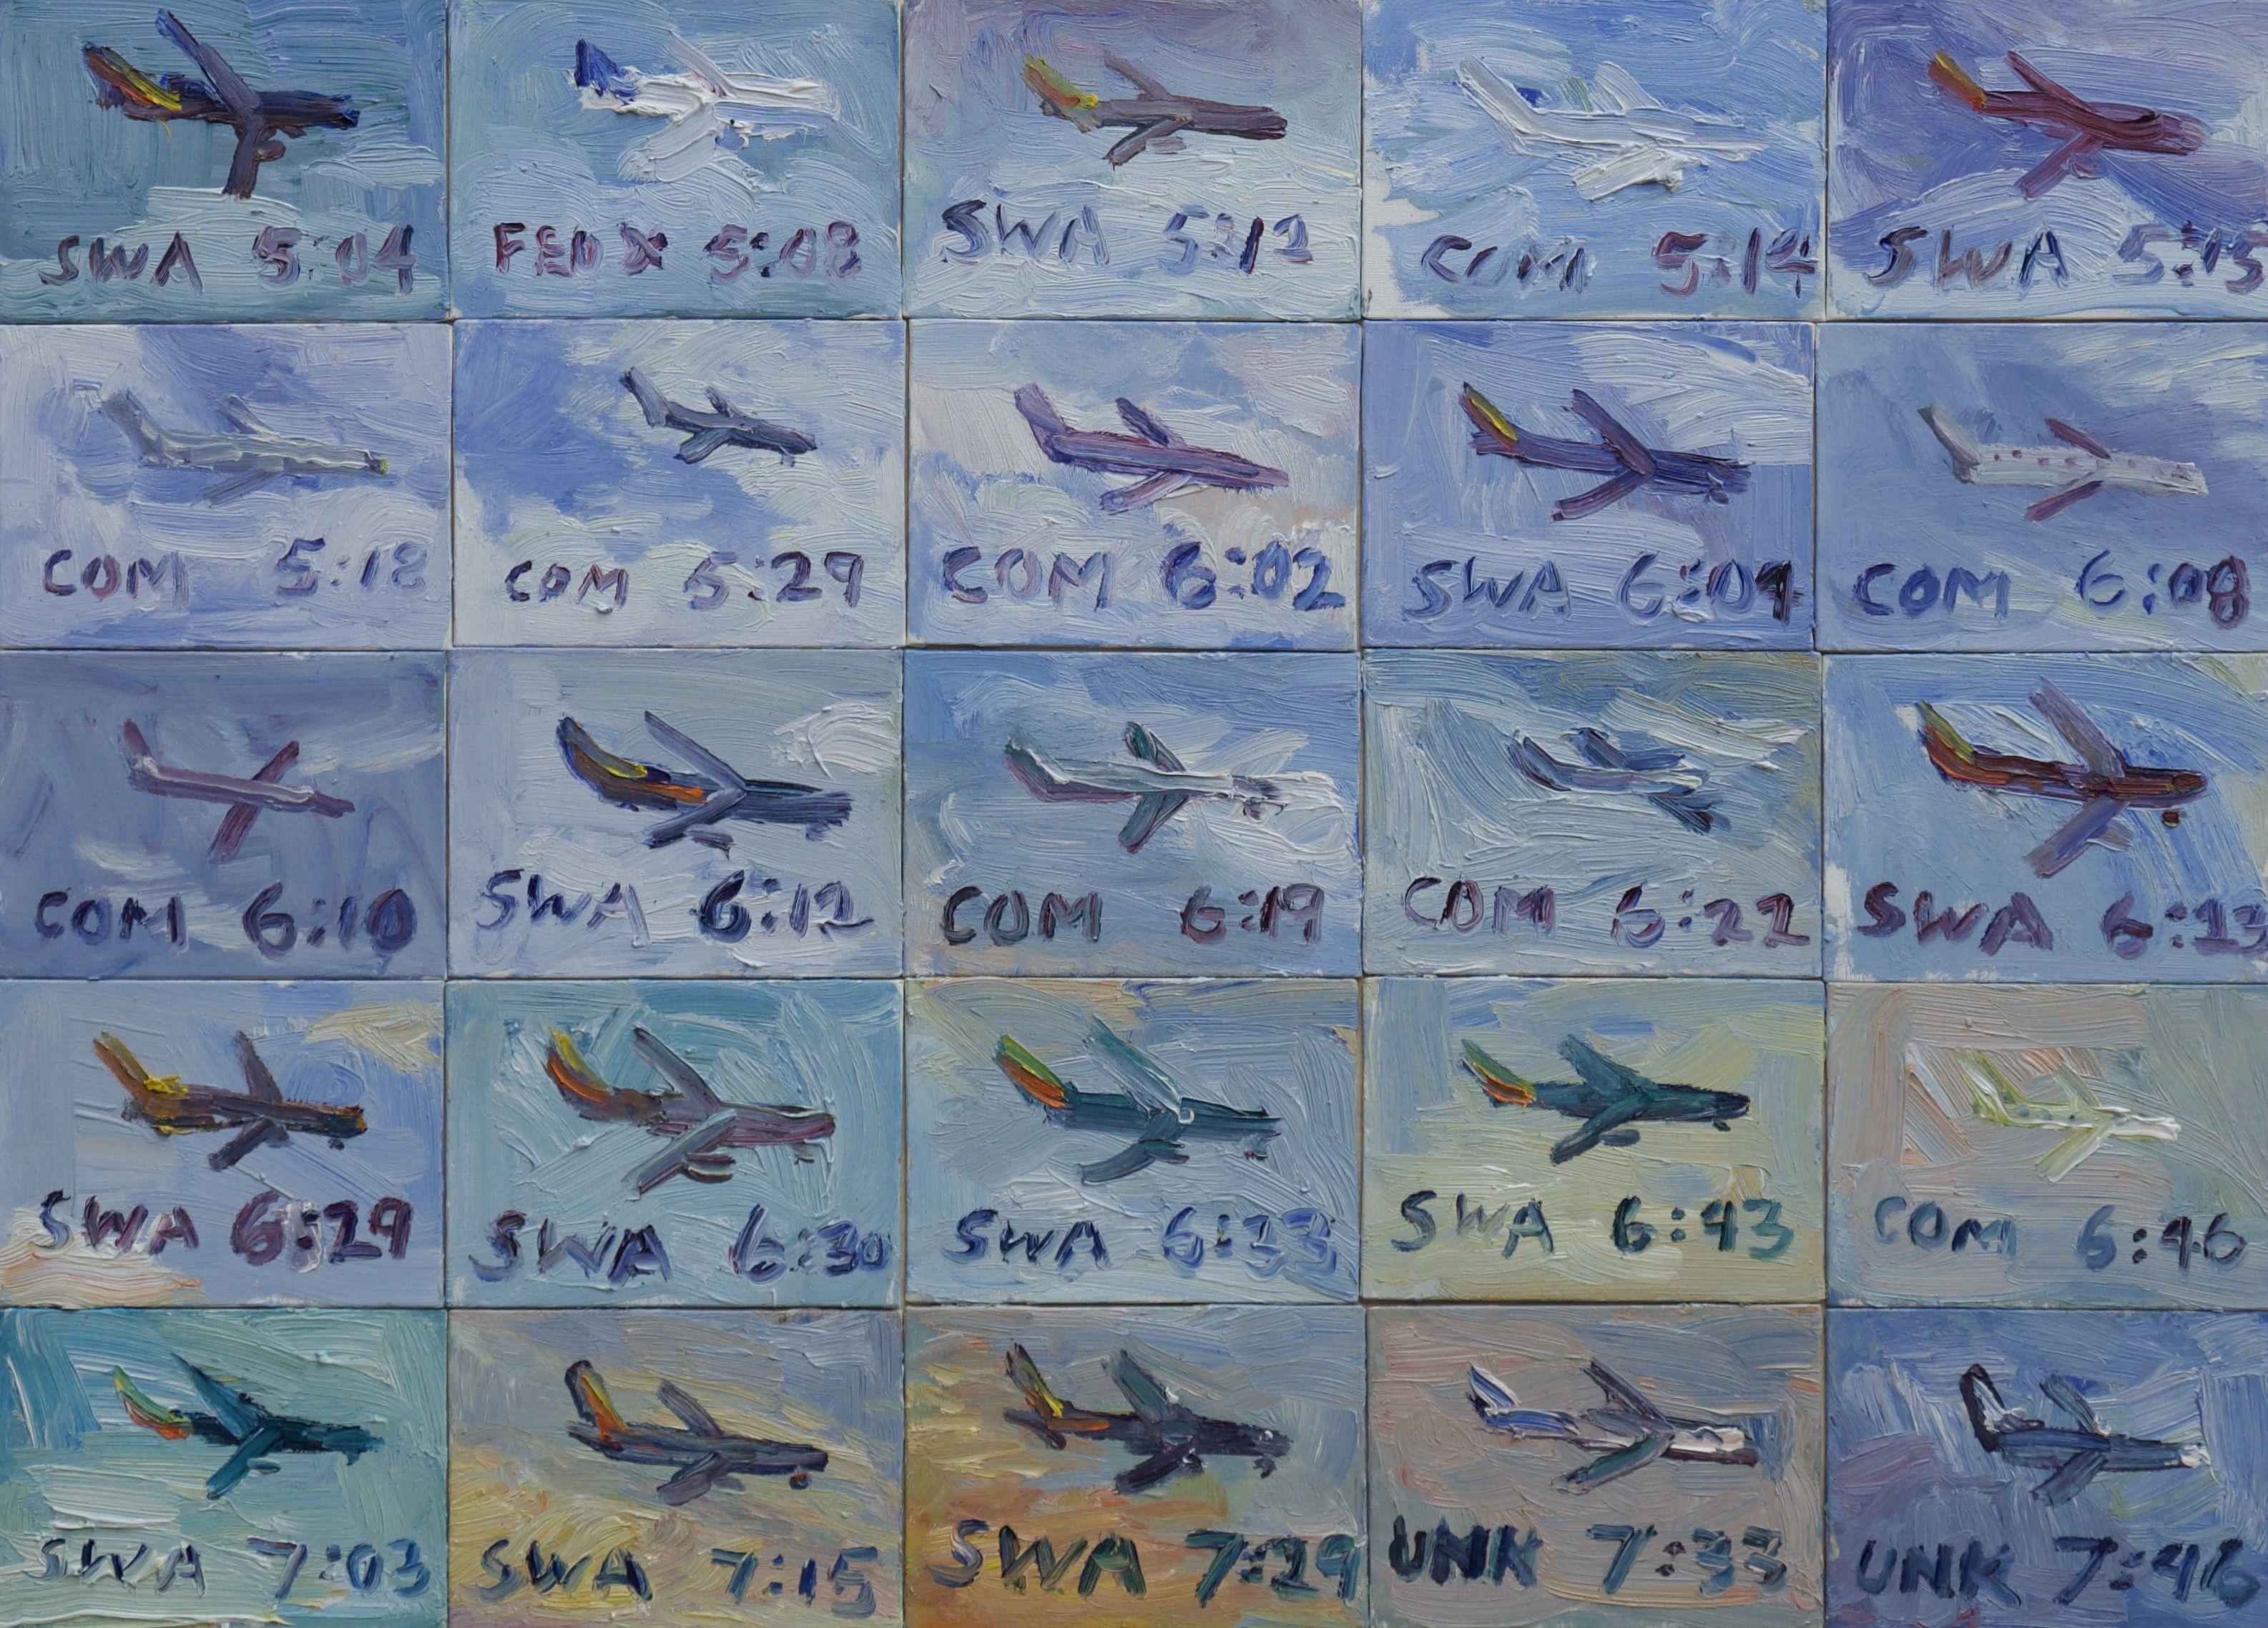 paintings of planes